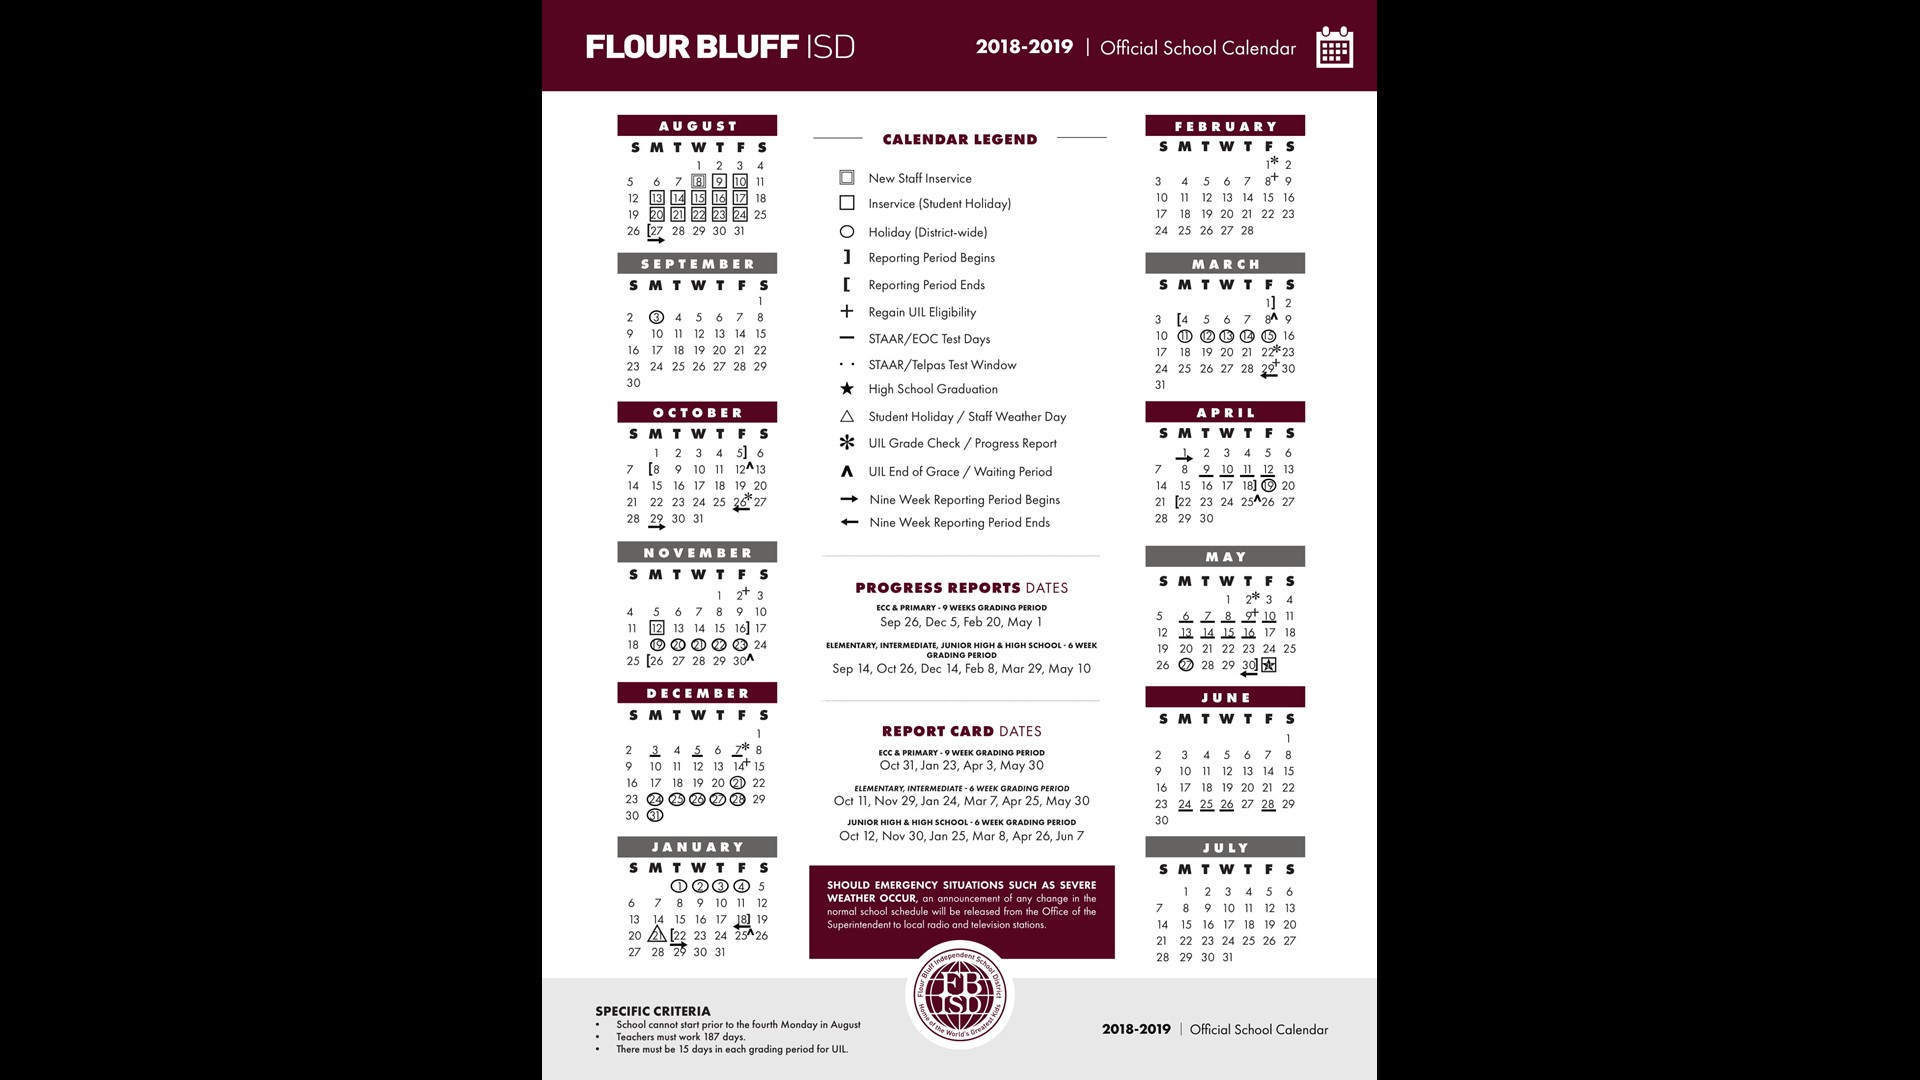 FBISD releases newly approved school calendar